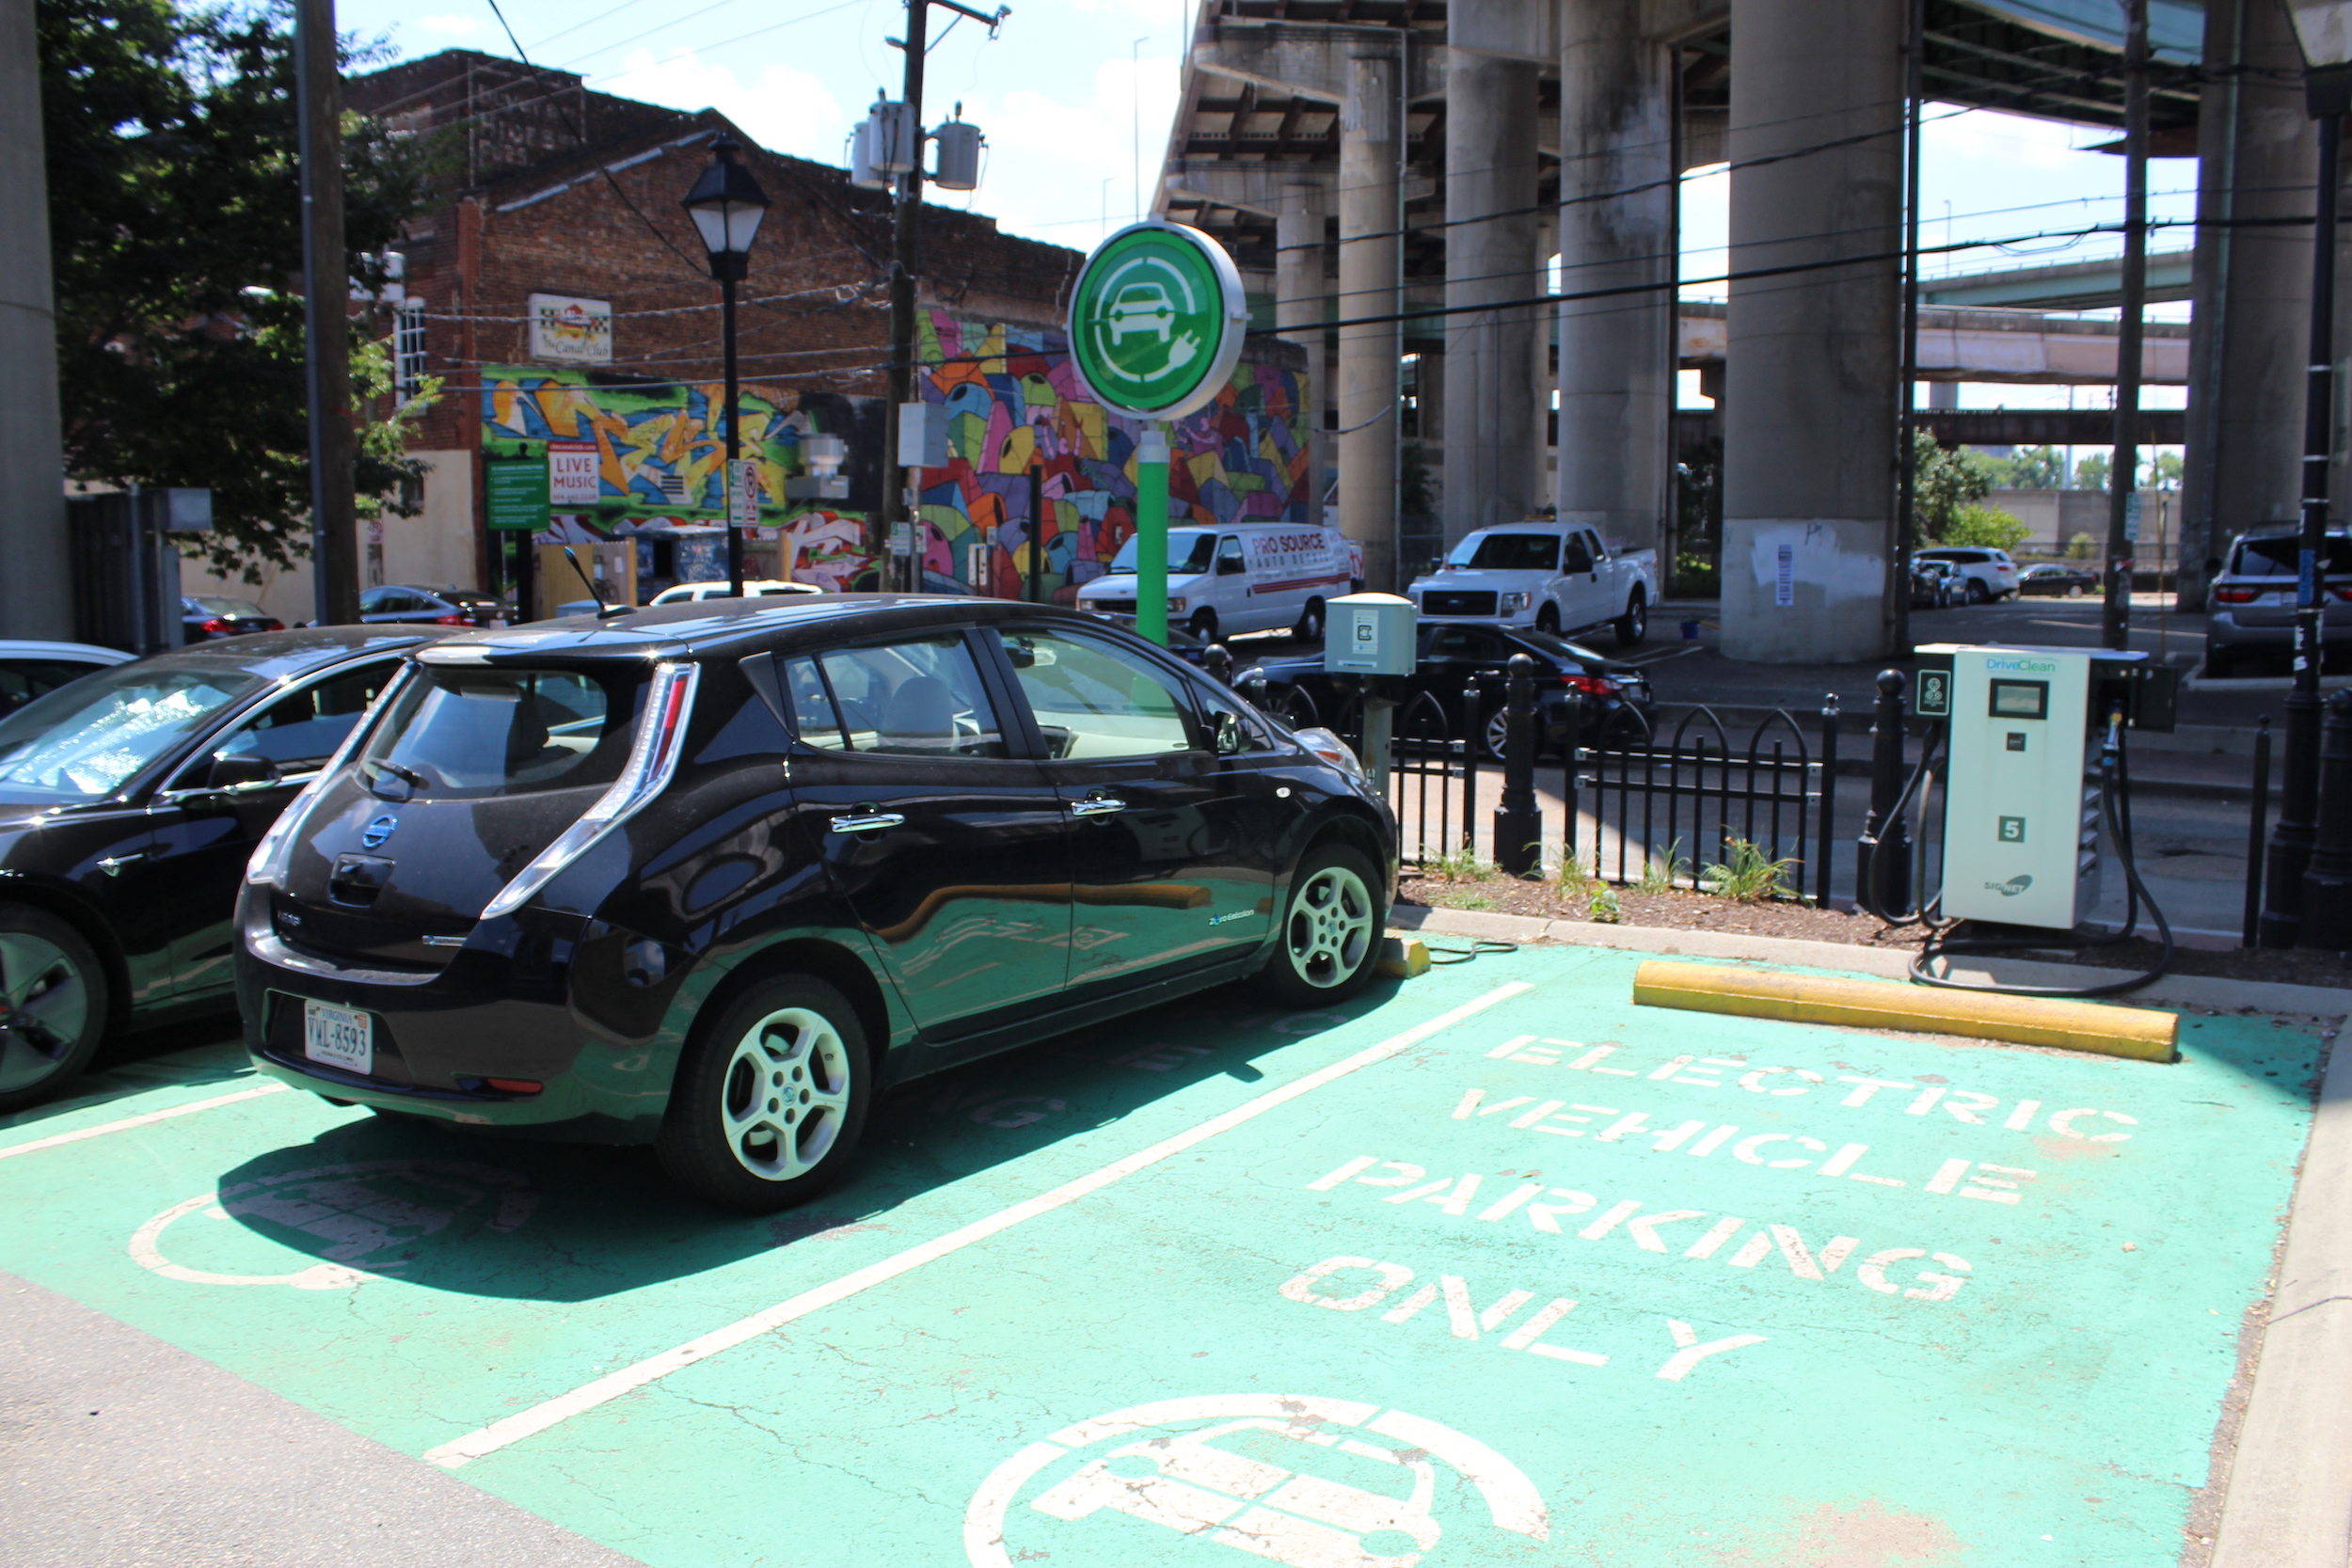 EV charging stations are being built across the state. Photo provided by Drive Electric RVA.